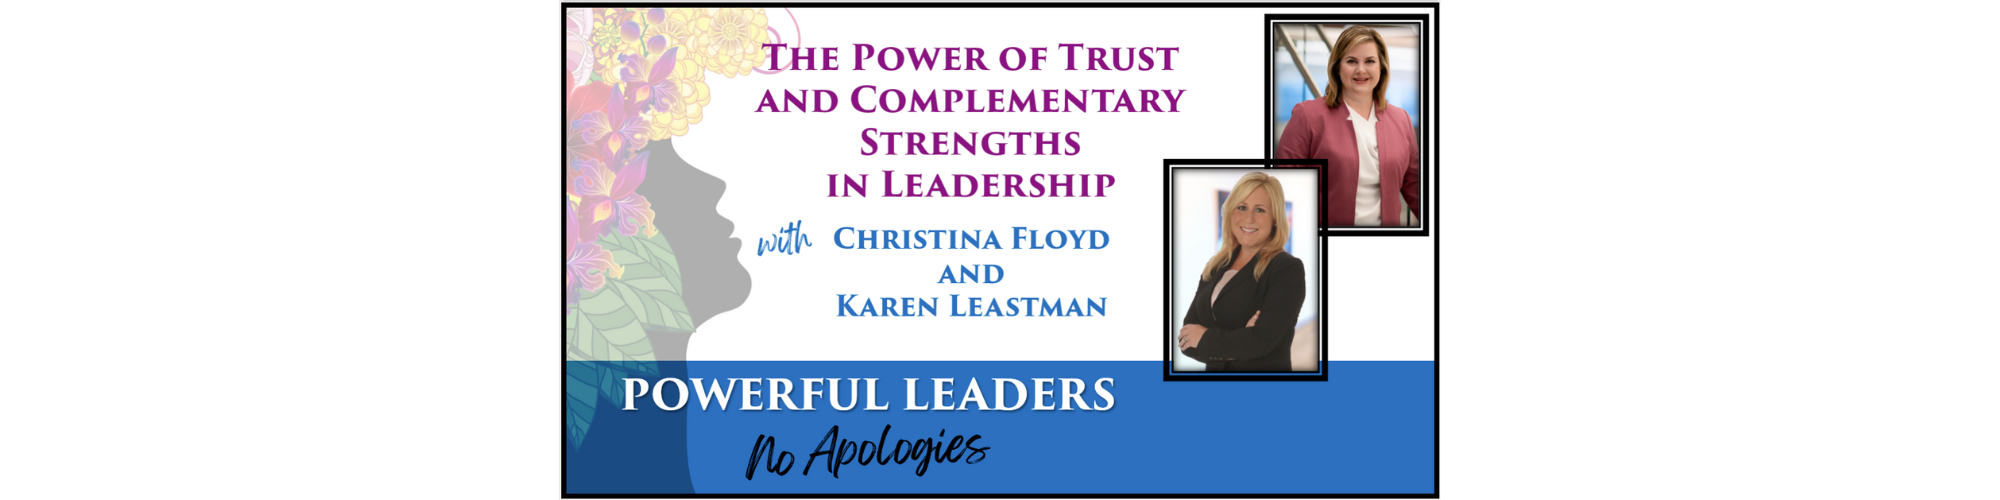 Powerful Leaders, No Apologies Episode 24 Podcast Banner